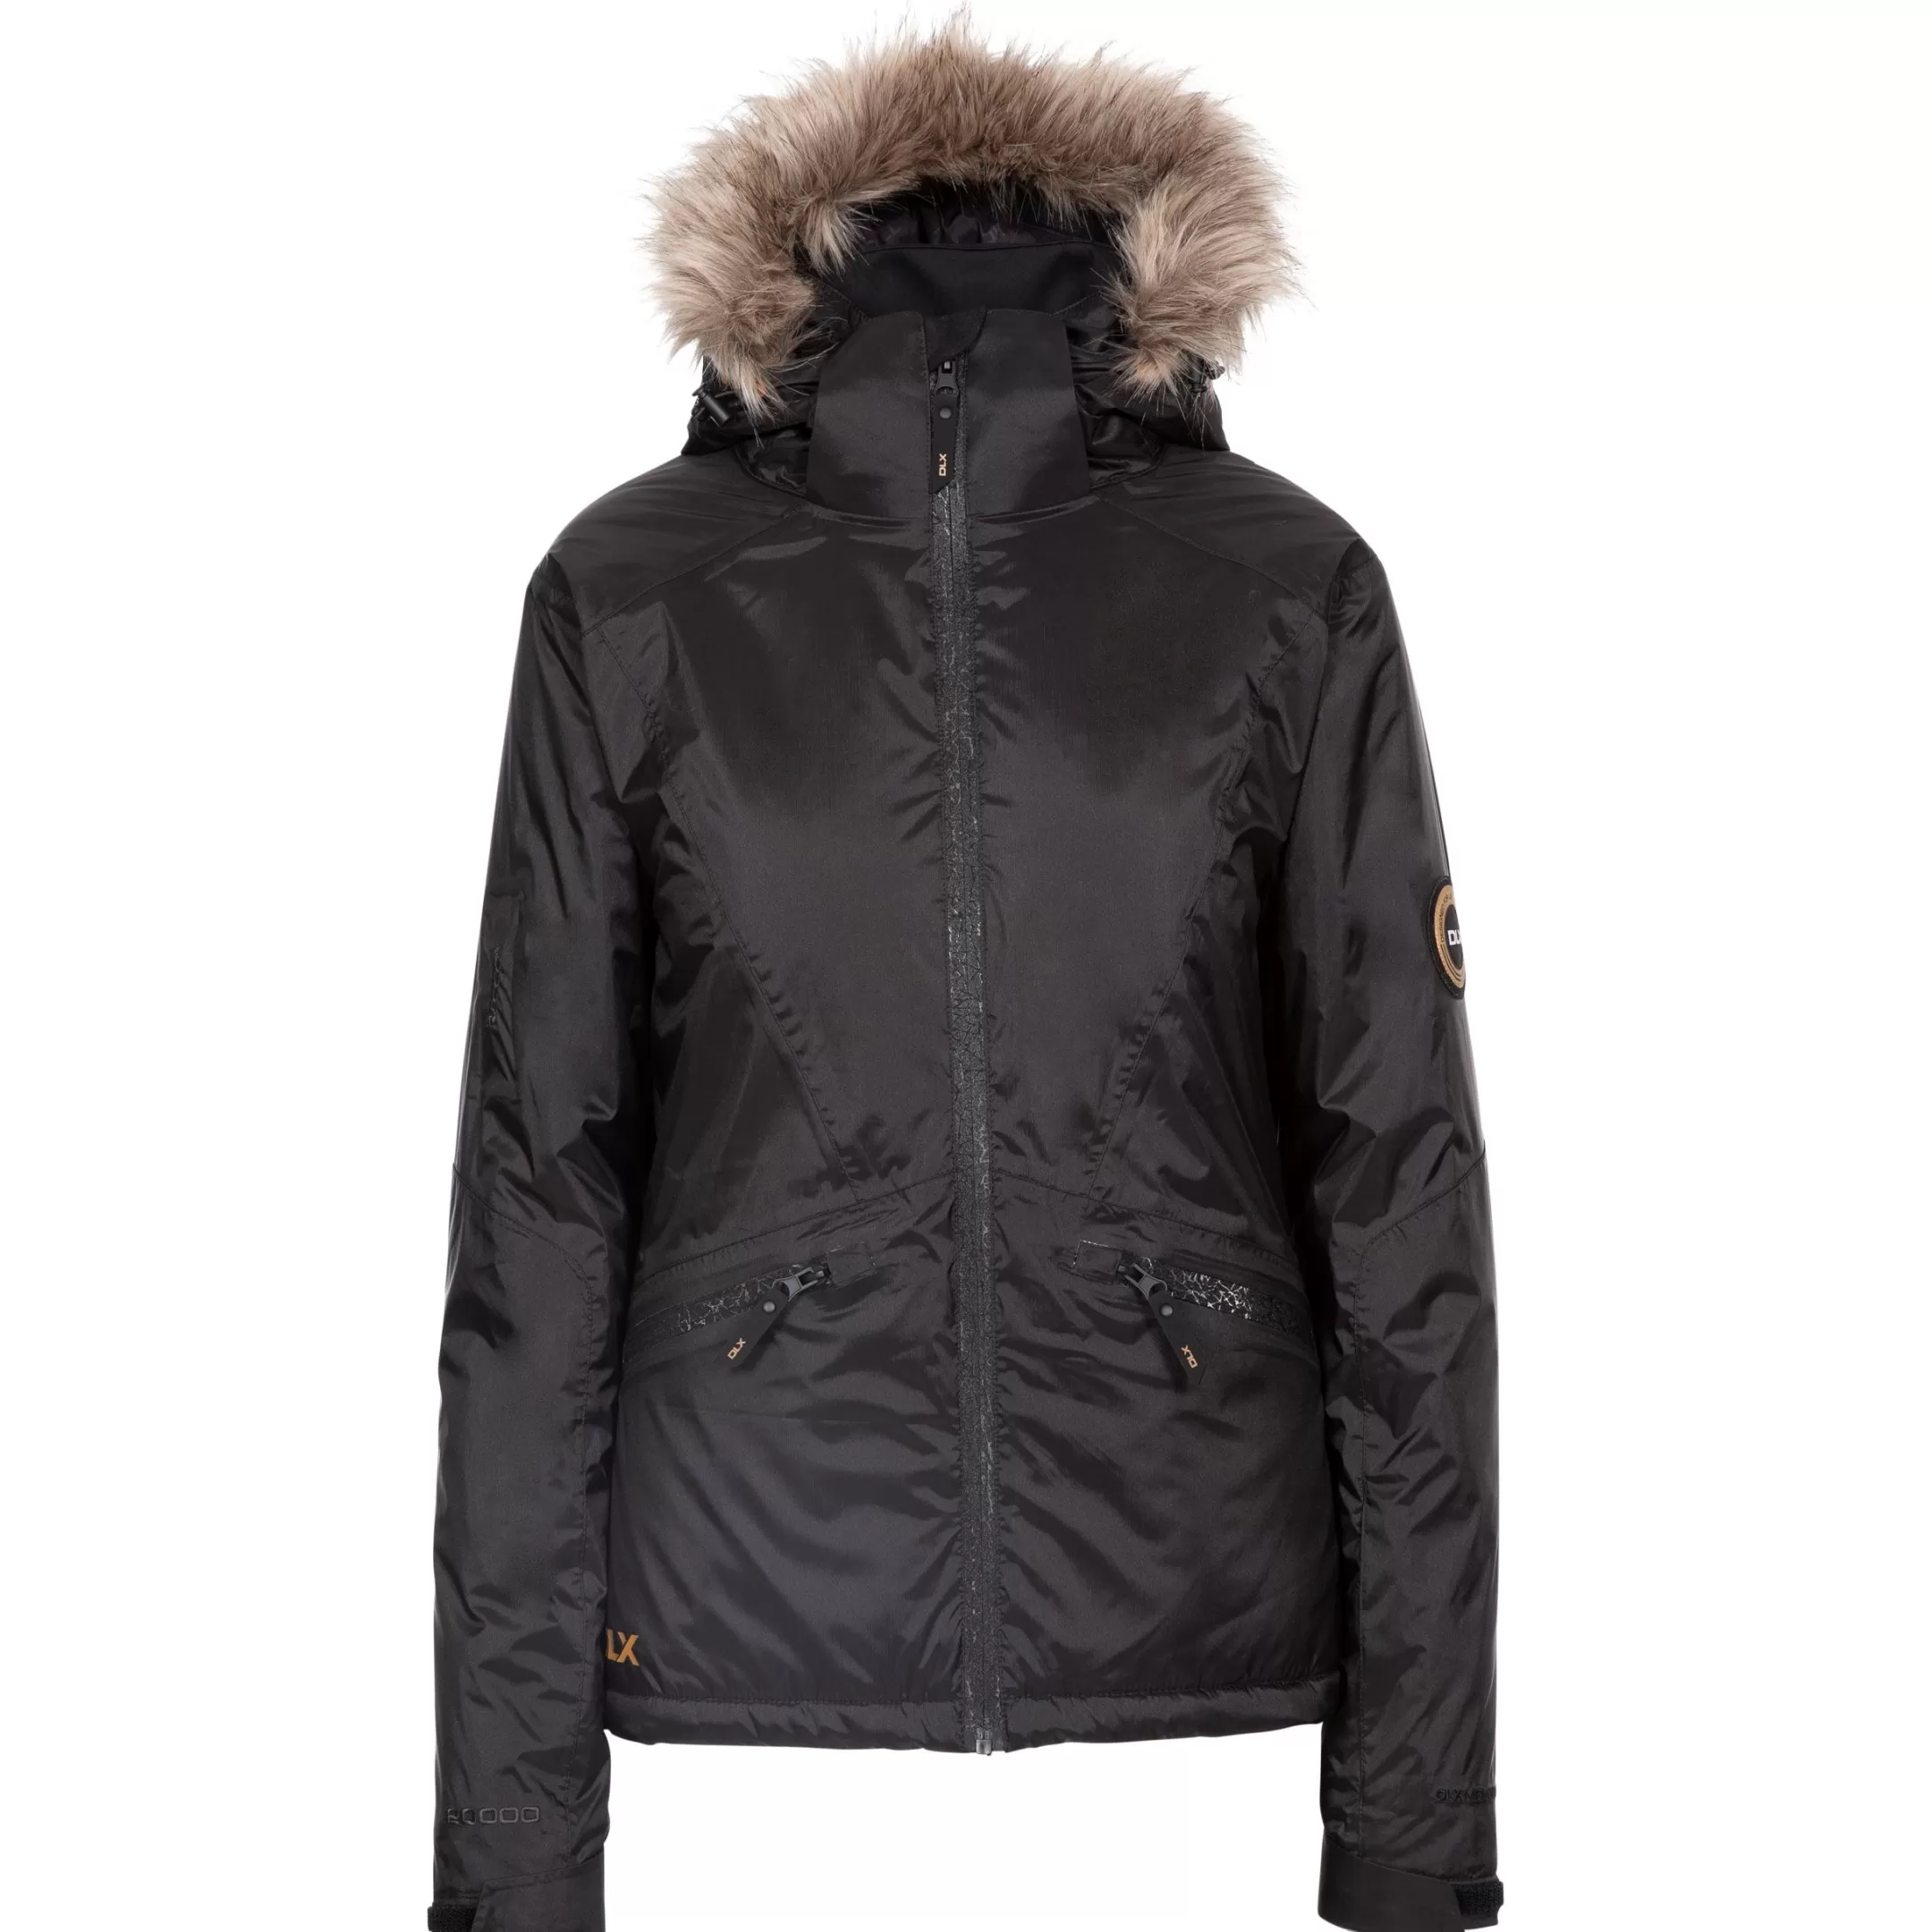 DLX Womens Ski Jacket with Recco Meredith | Trespass Clearance